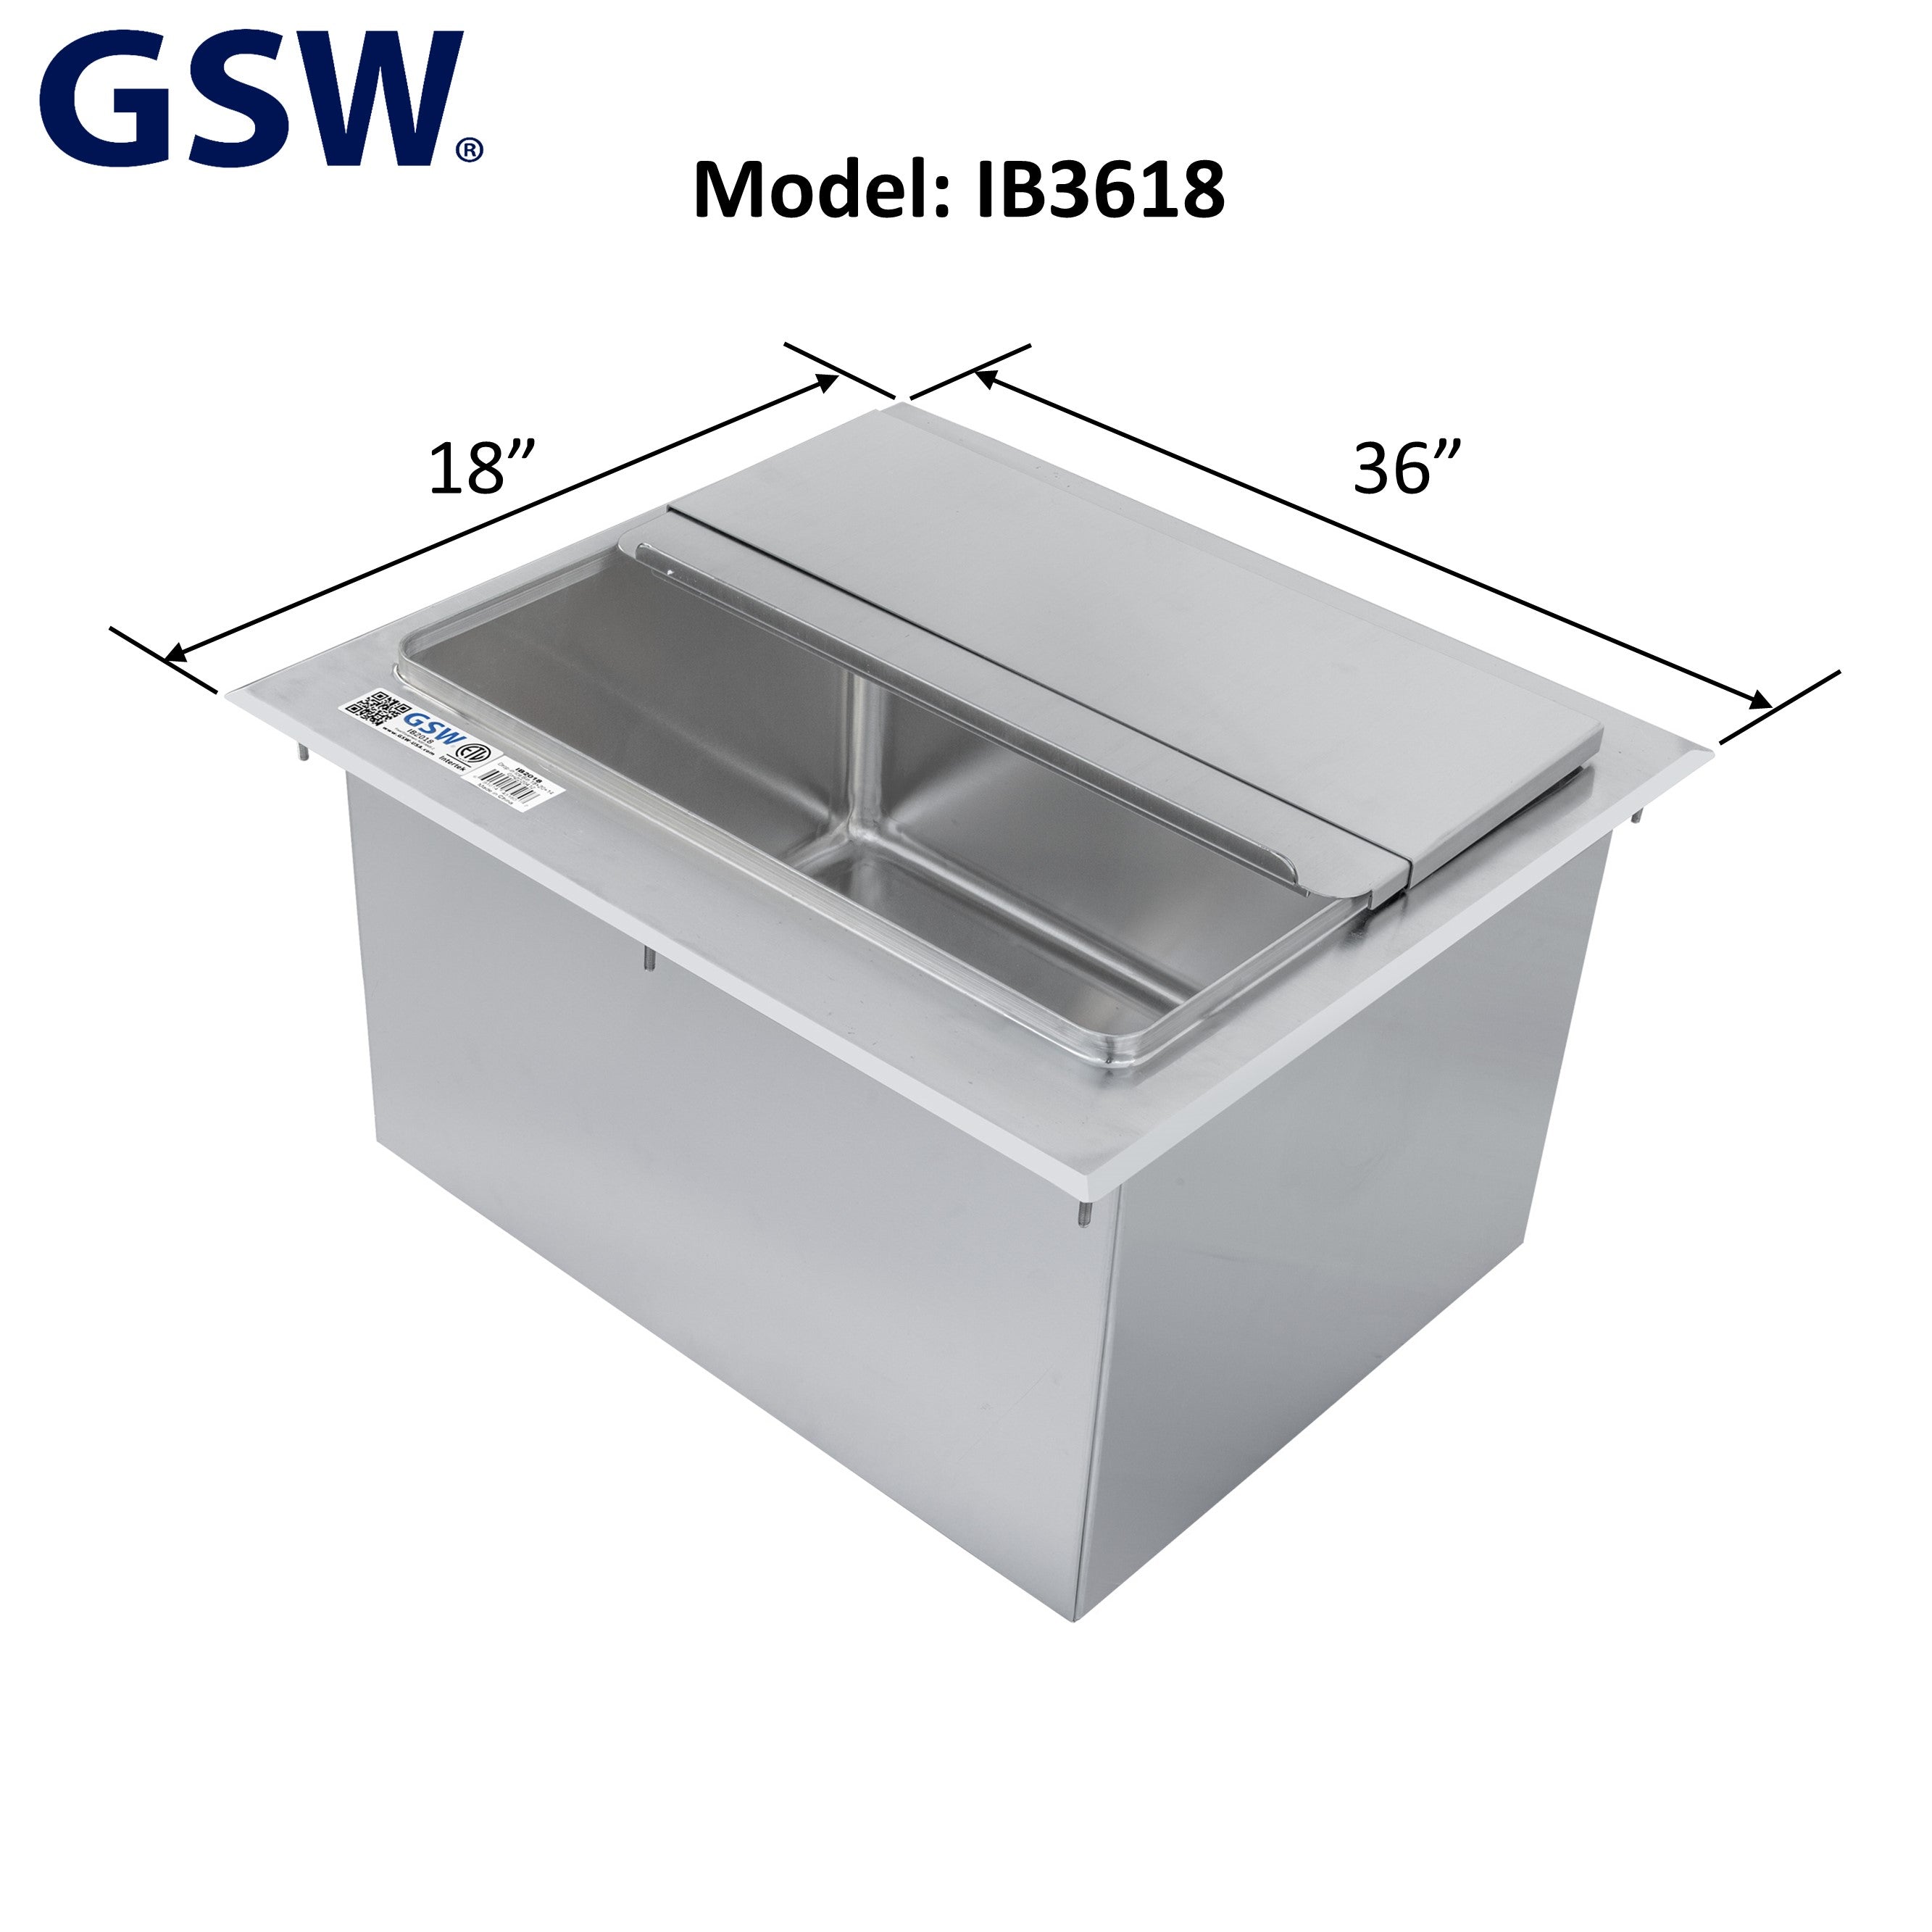 GSW IB3618 Stainless Steel Drop-In Ice Bin 18”D x 36”W x 14”H with Removable Sliding Cover, 9” x 14” Double Walled Ice Bin with 1” NPT Drain, for Storing Ice Cold Wine Beer